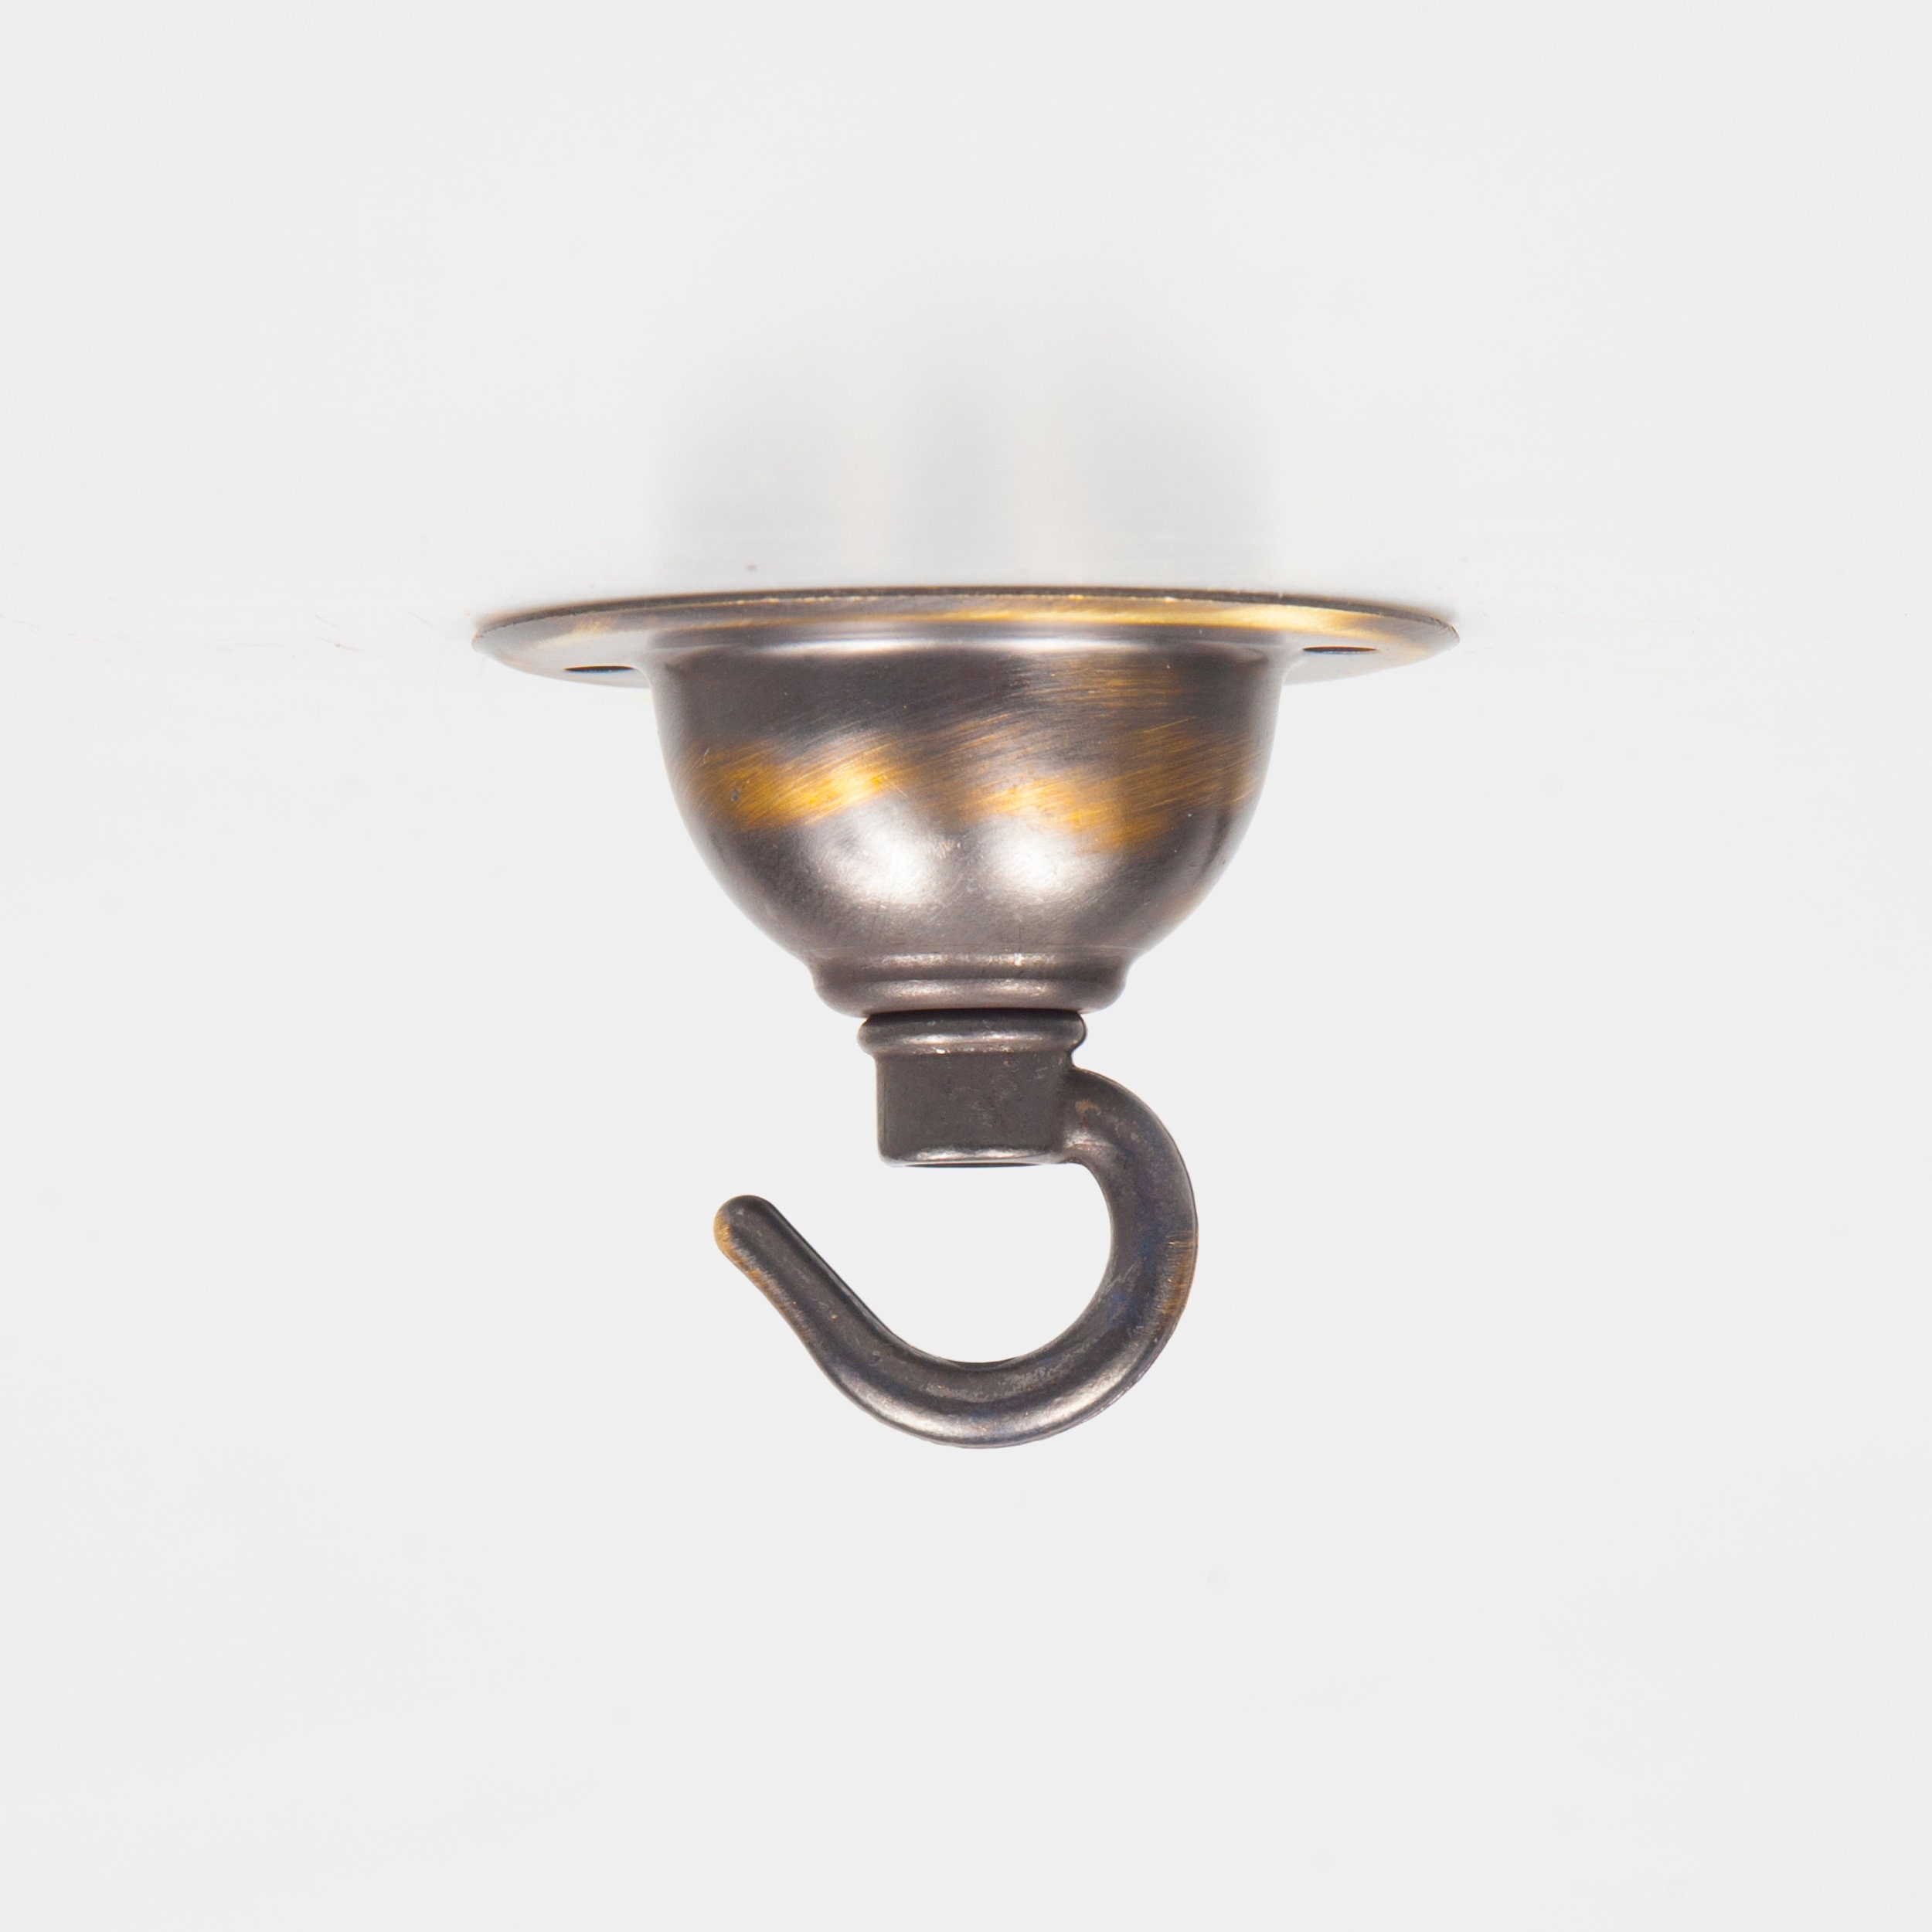 Ceiling Hook for Light Fittings Copper Various FINISHES